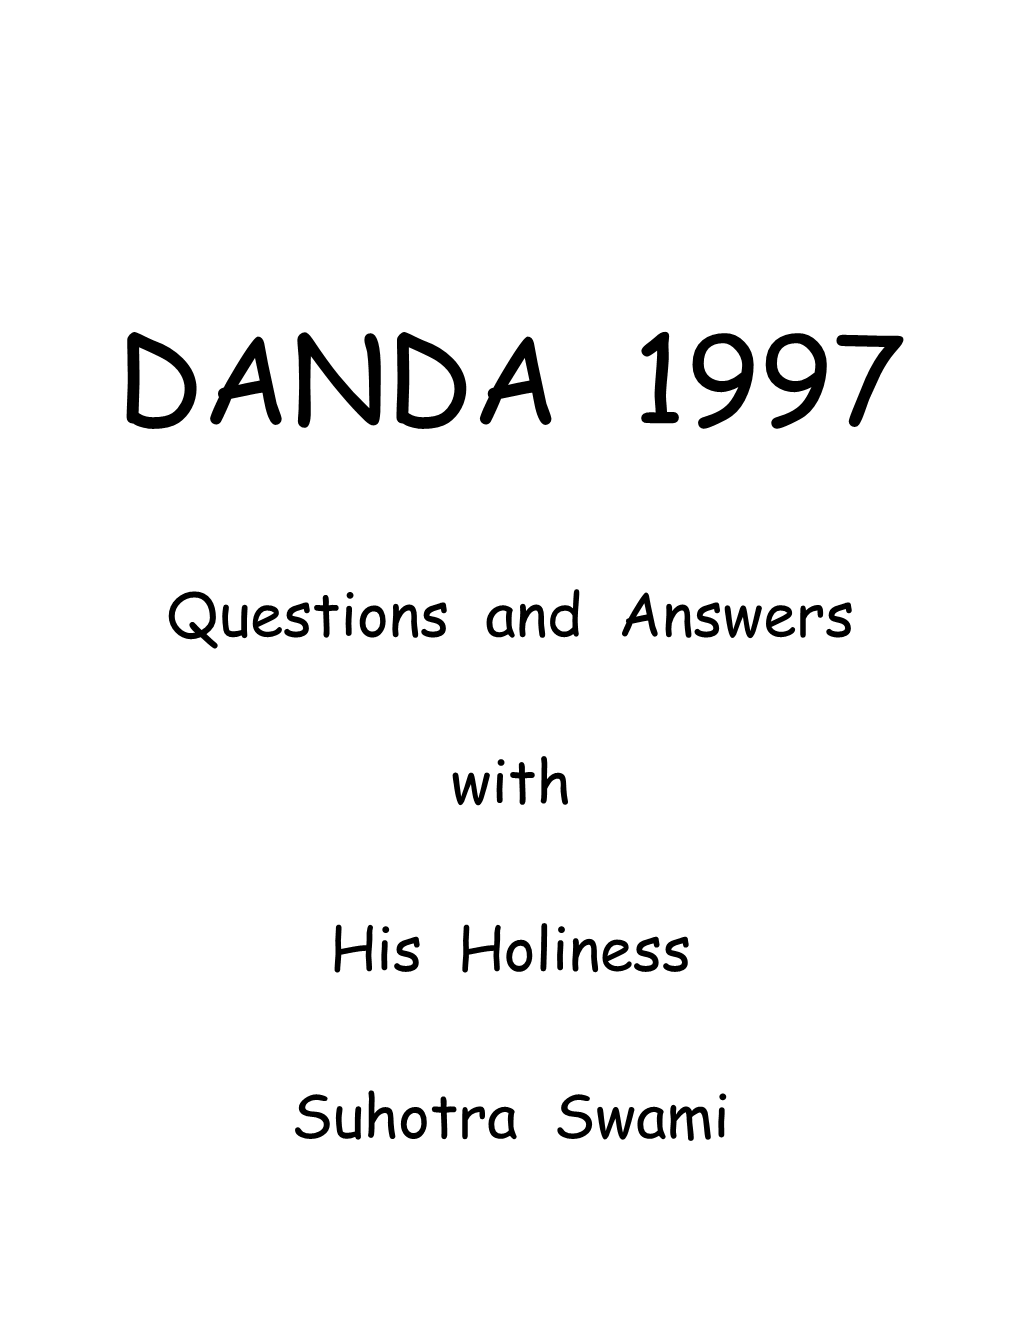 The Name of the Conference Is: (Have) Danda (Will Travel)